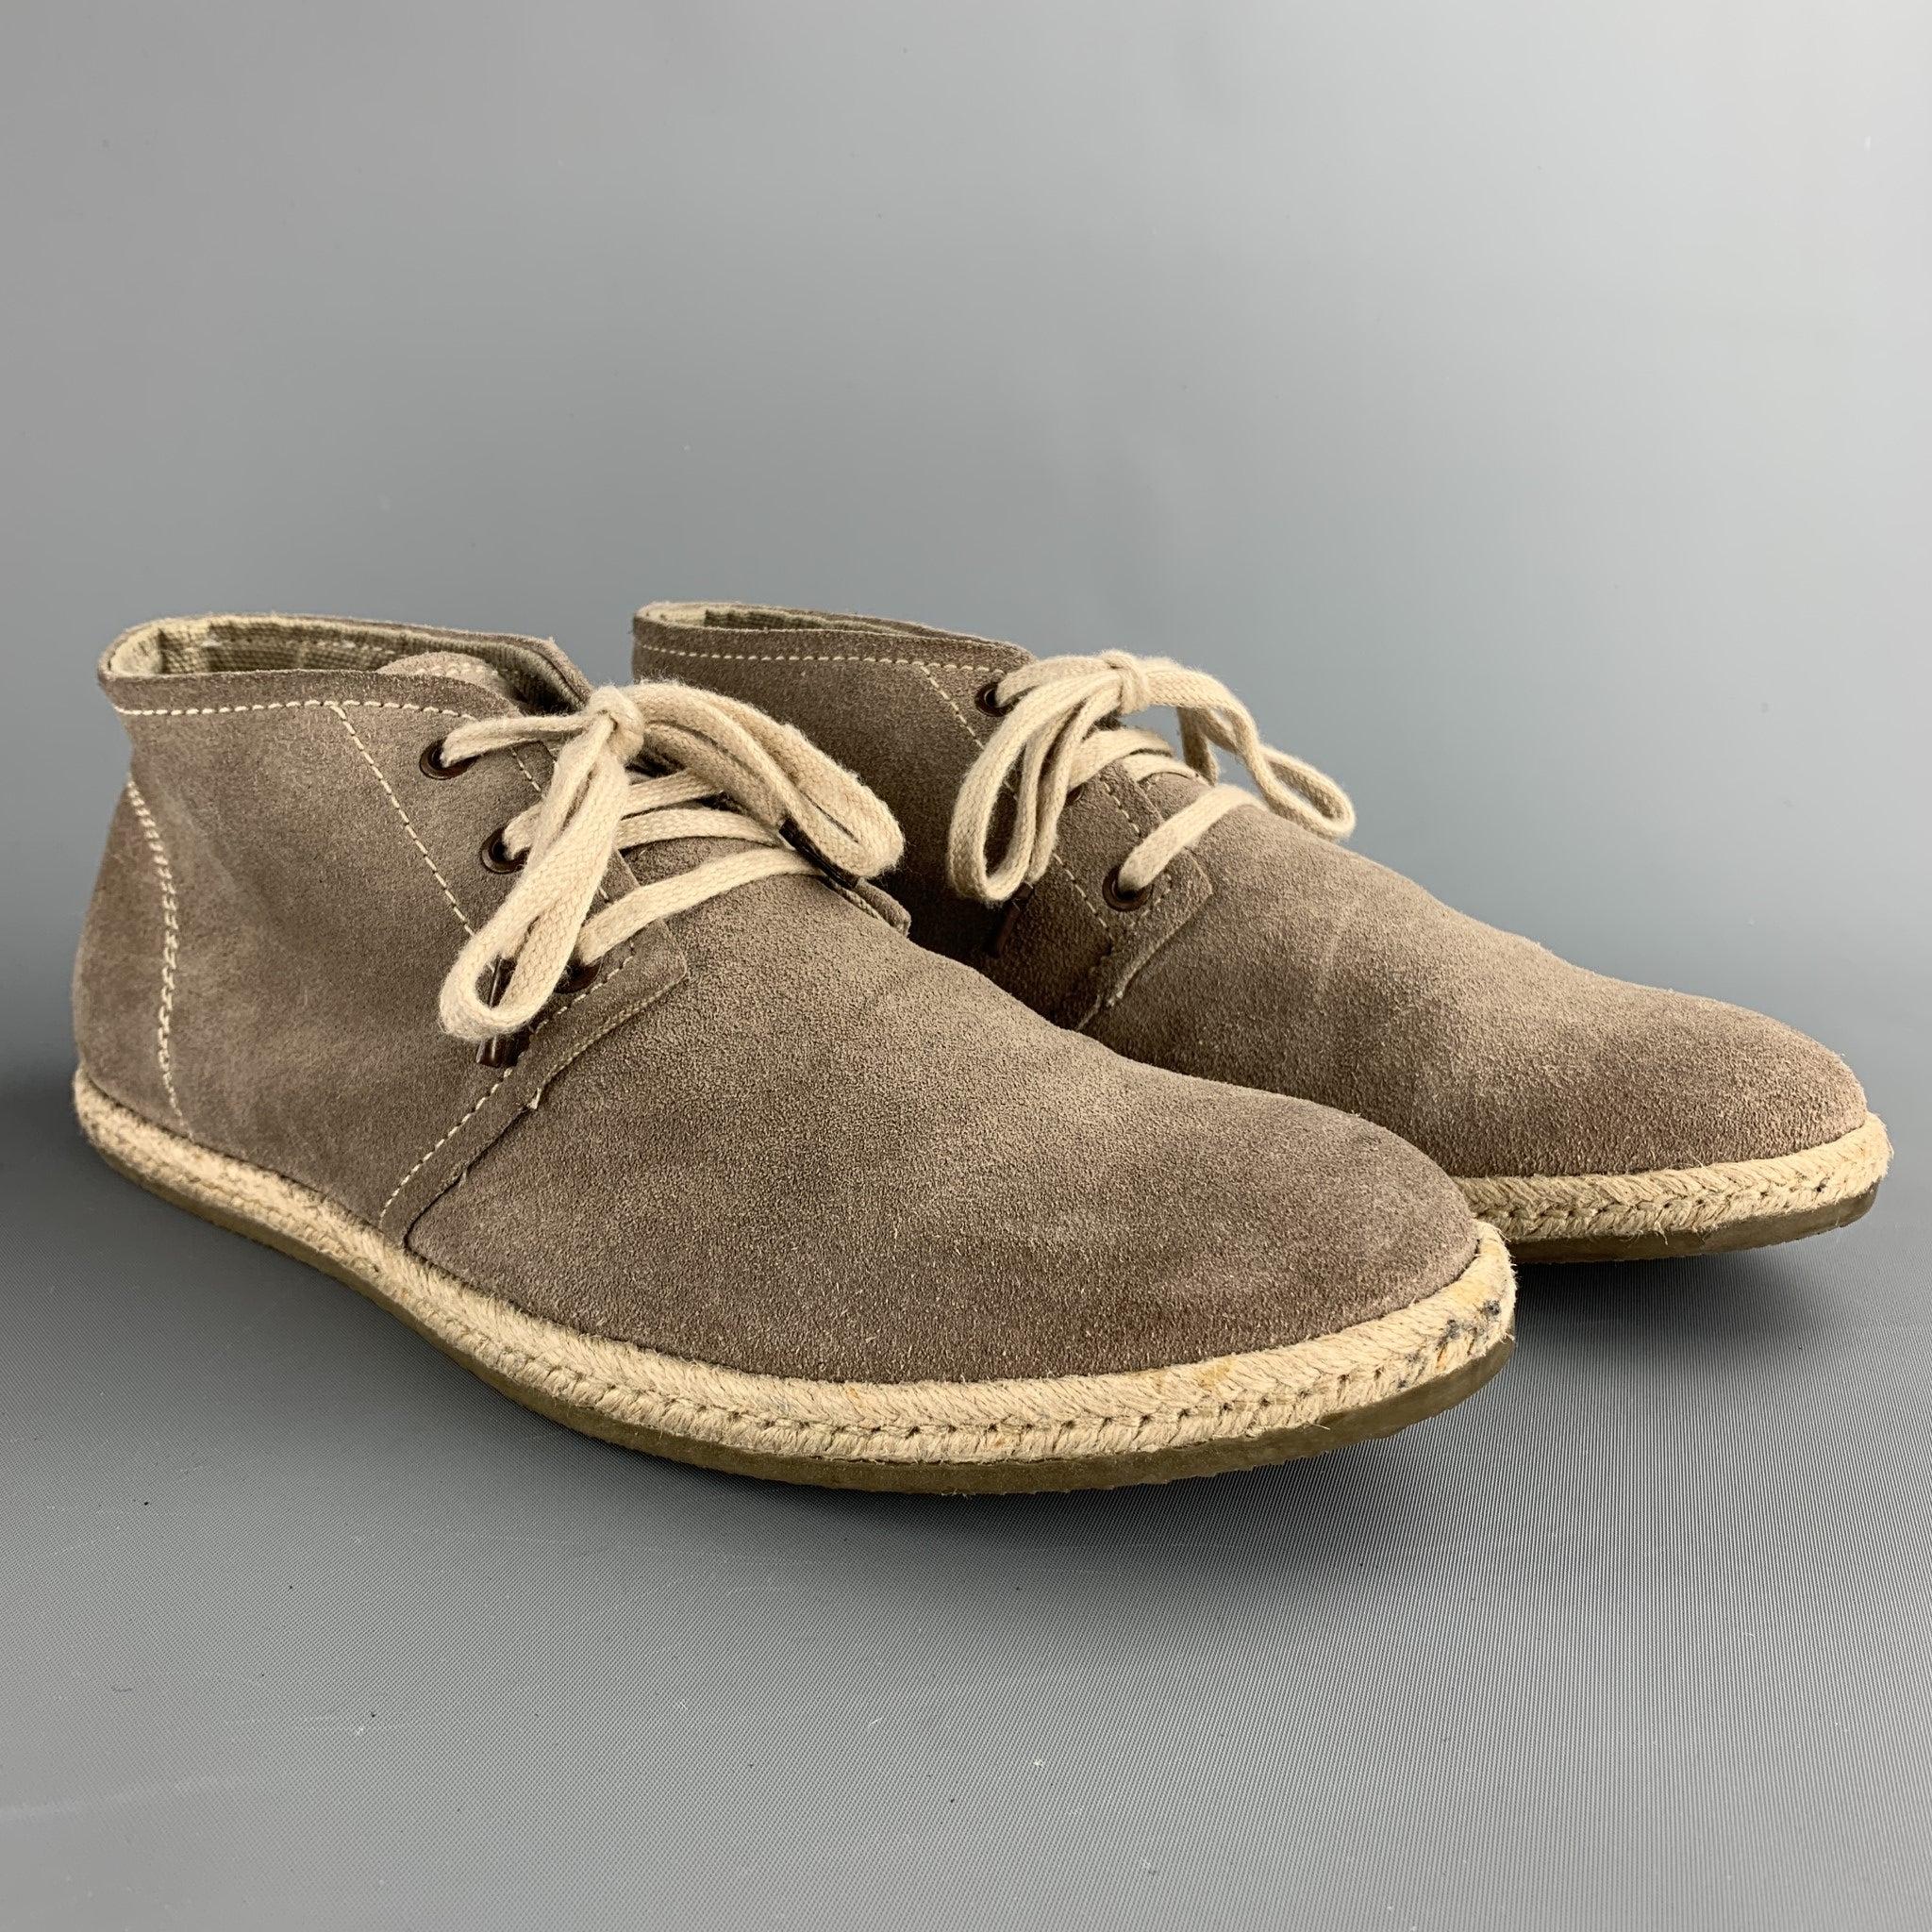 ALLSAINTS SPITALFIELDS boots comes in a taupe suede with a braided rope trim featuring a chukka style and a lace up closure.
Good
Pre-Owned Condition. 

Marked:   41Outsole: 11 inches  x 3.5 inches 
  
  
 
Reference: 76629
Category: Boots
More